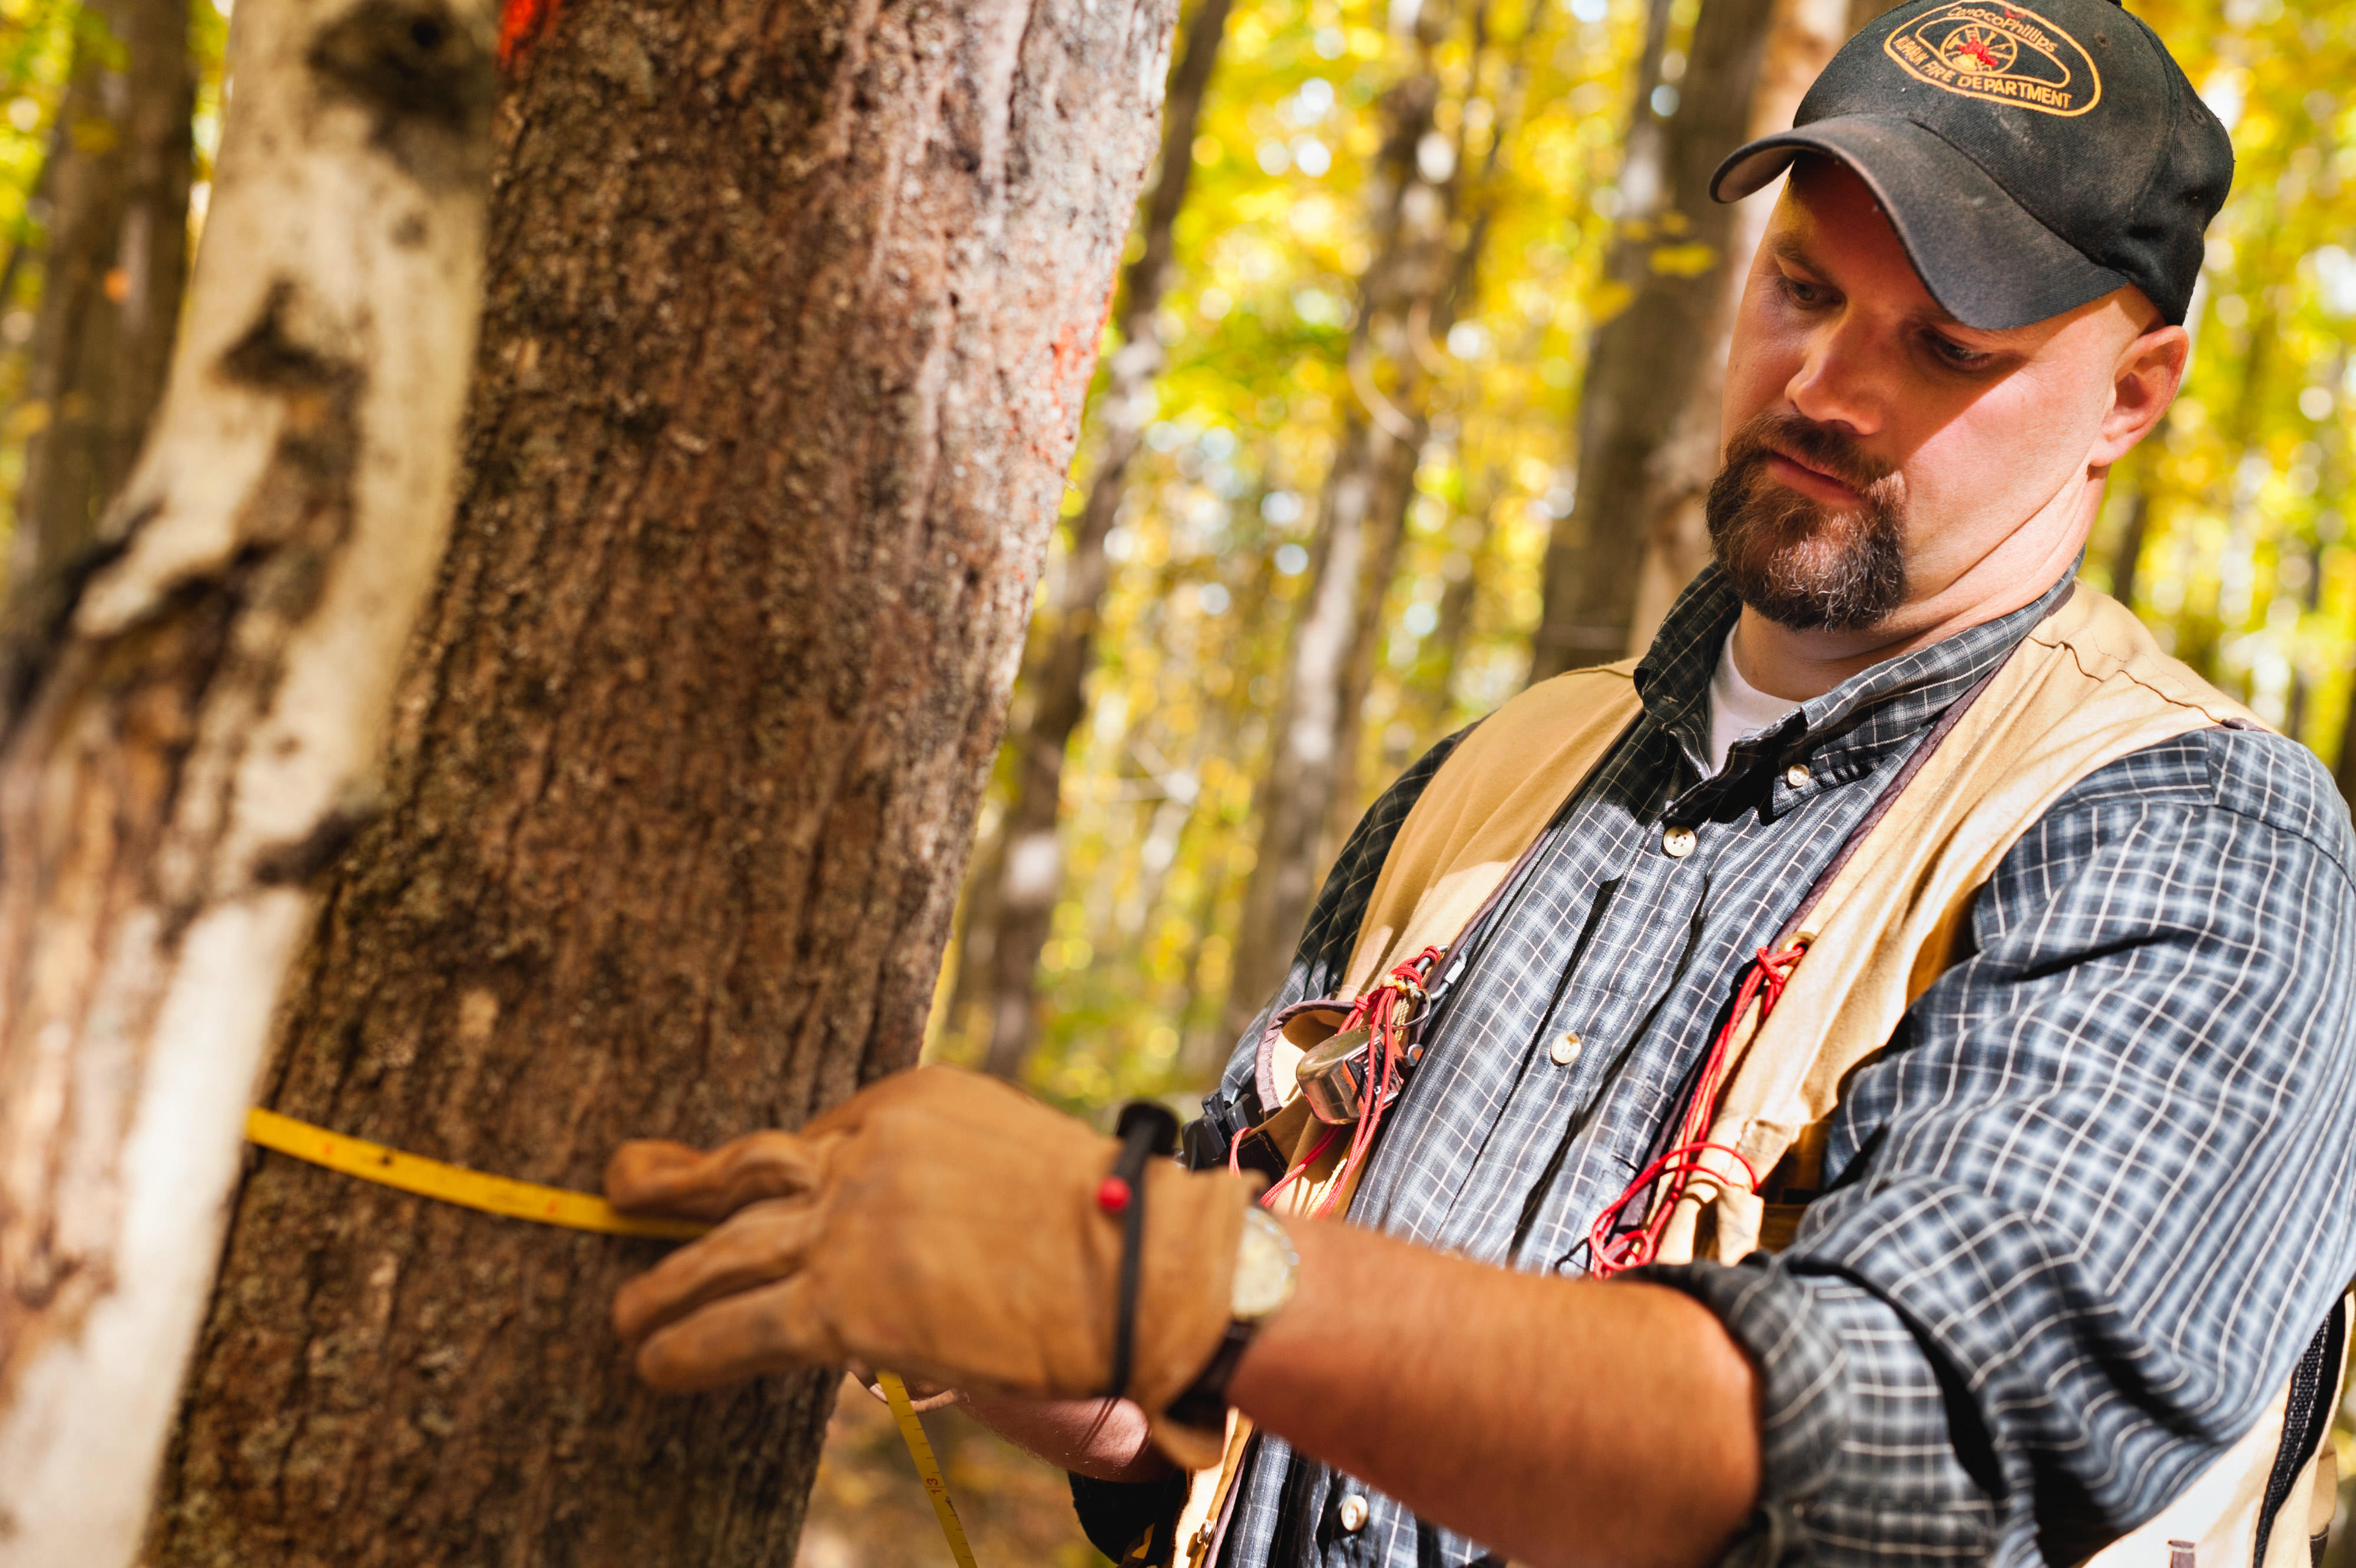 Forest manager Jon Fosgitt holds a measuring tape wrapped around the trunk of a small tree and reads the measurement.